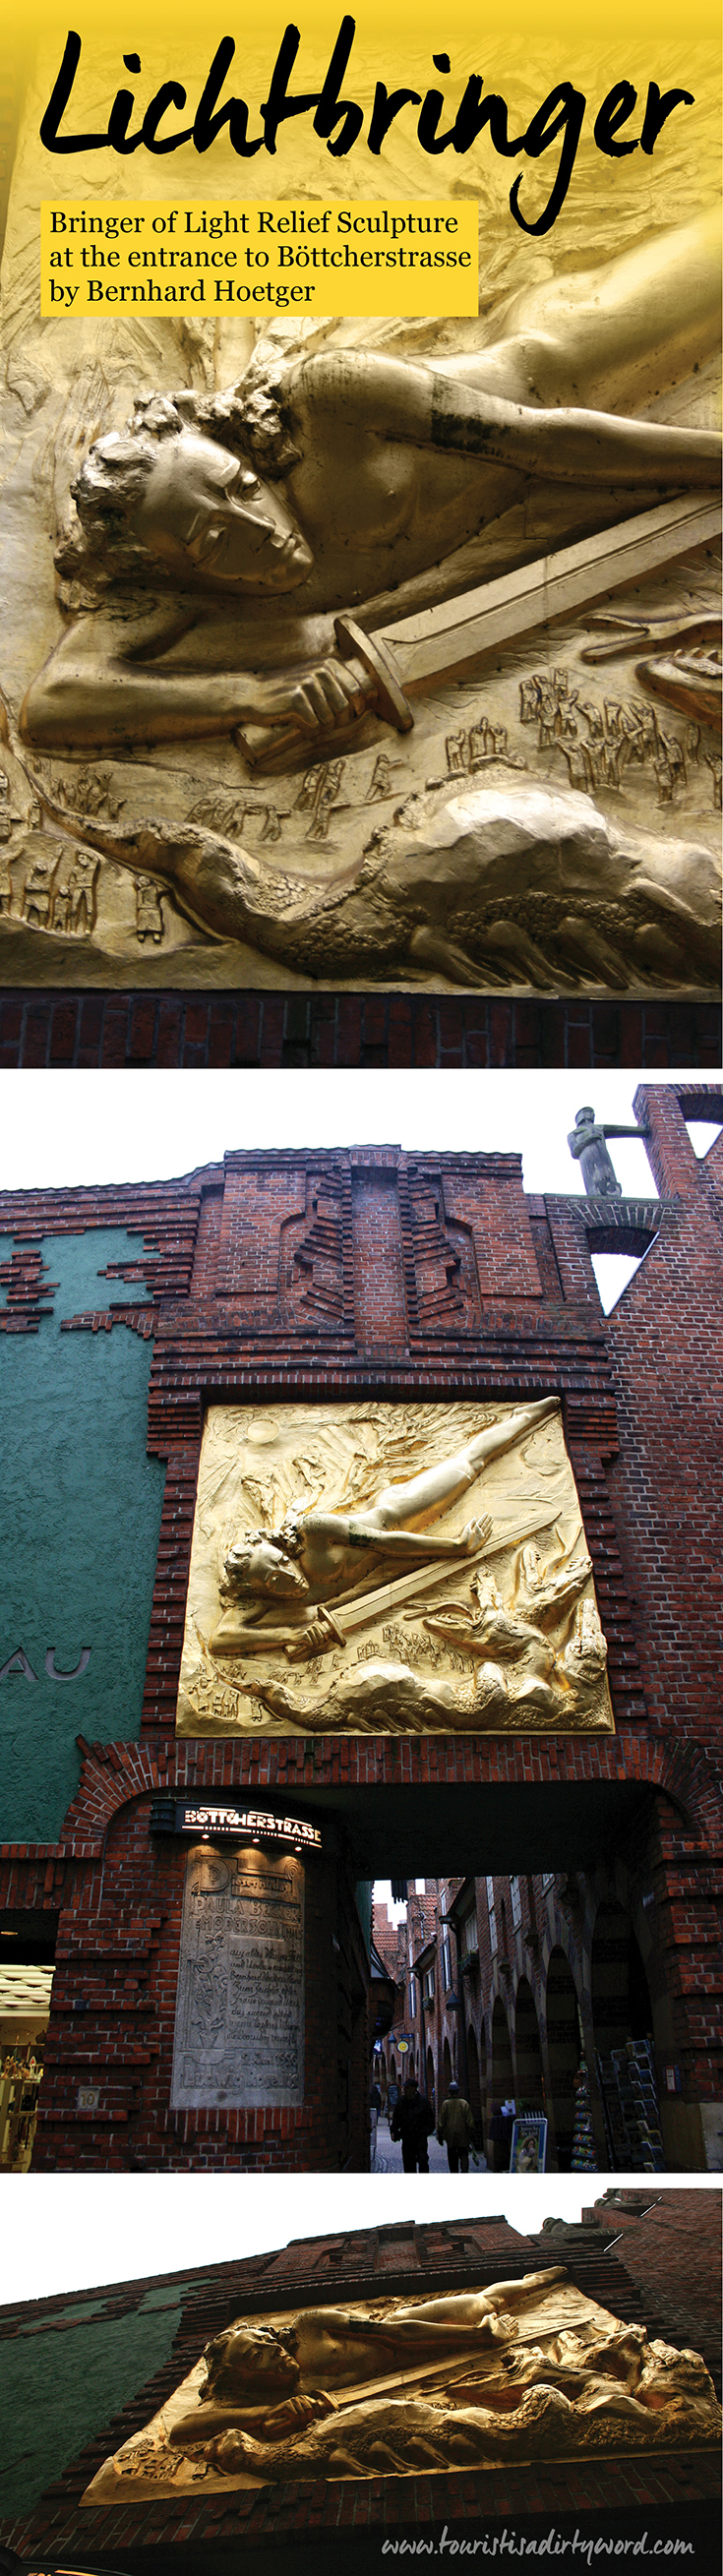 Beginning Your Stroll Through Böttcherstrasse at the Entrance with the Light Bringer Relief Sculpture • Bremen, Germany